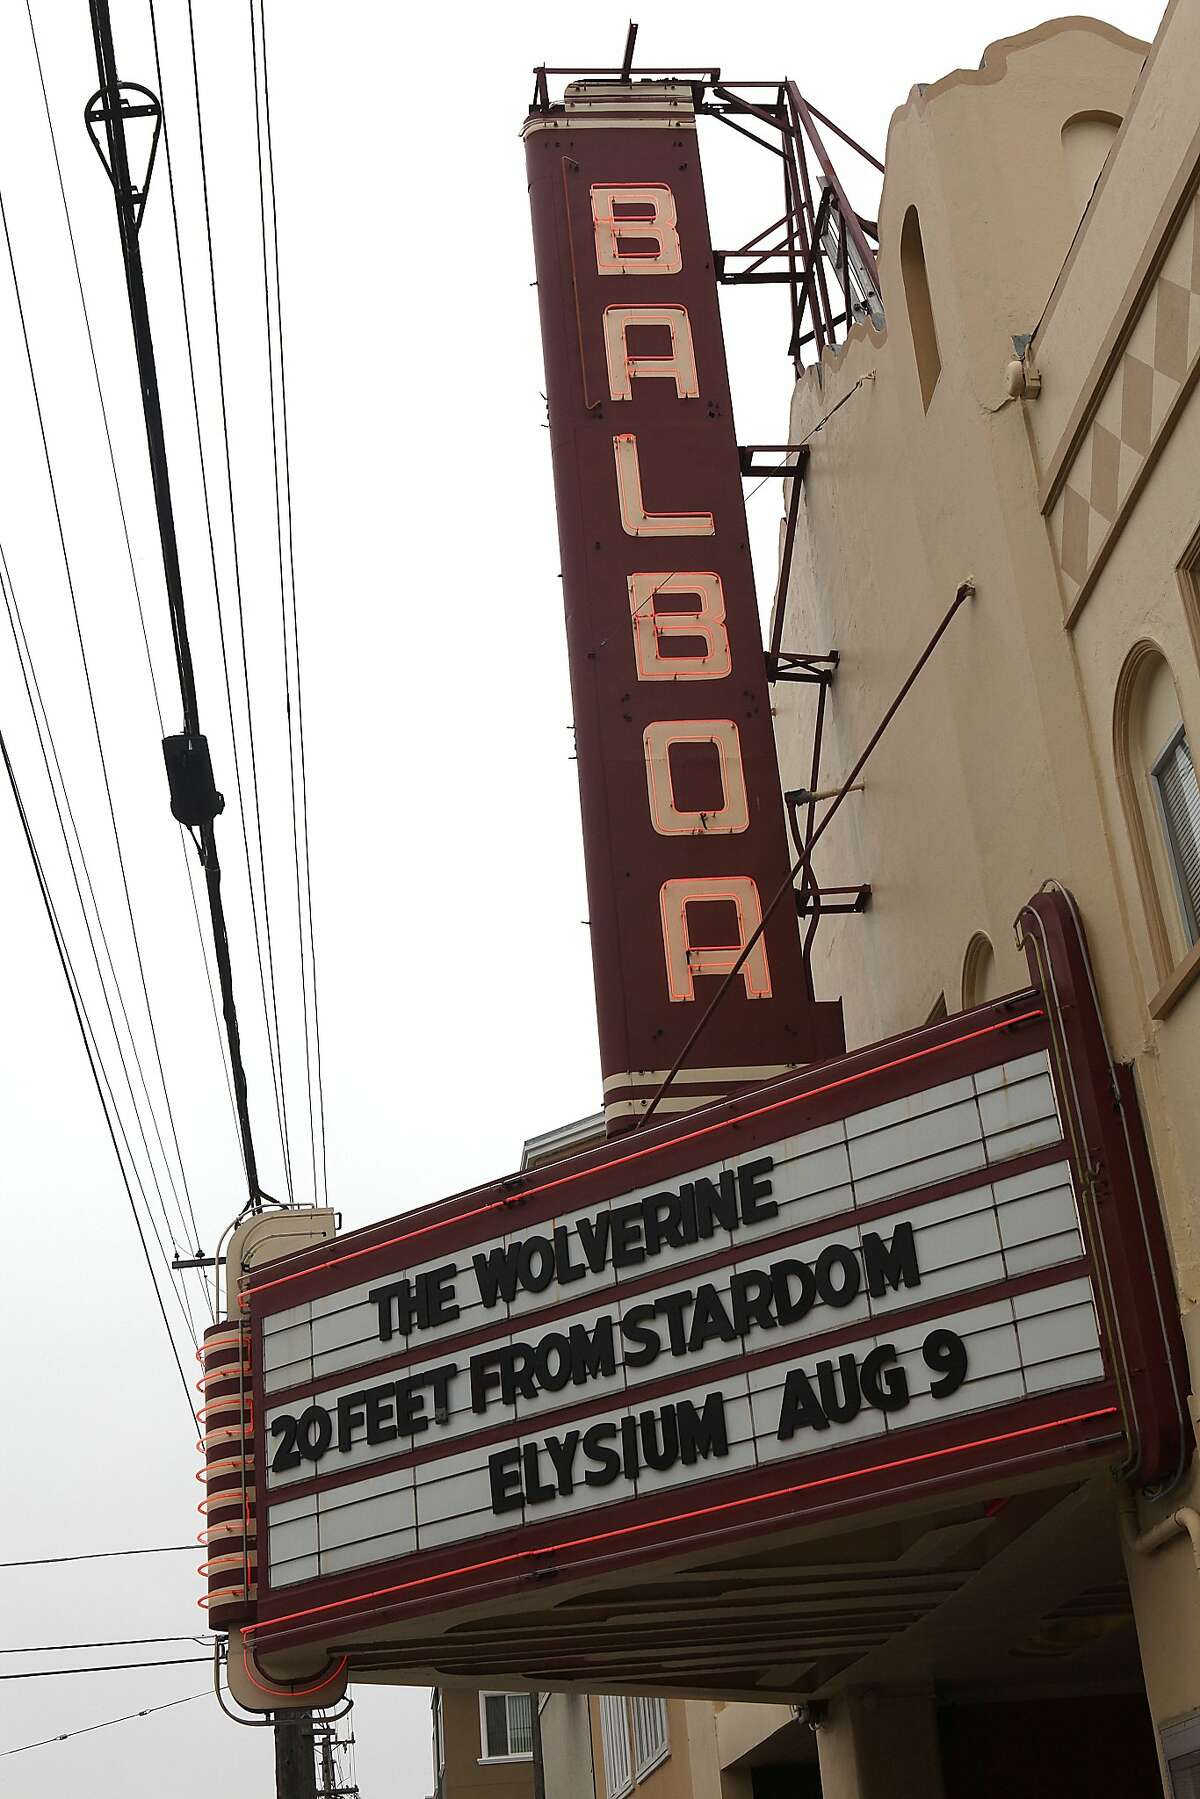 The Balboa Theatre will show the game on a 26-foot movie screen. Admission is free and concessions will be for sale.